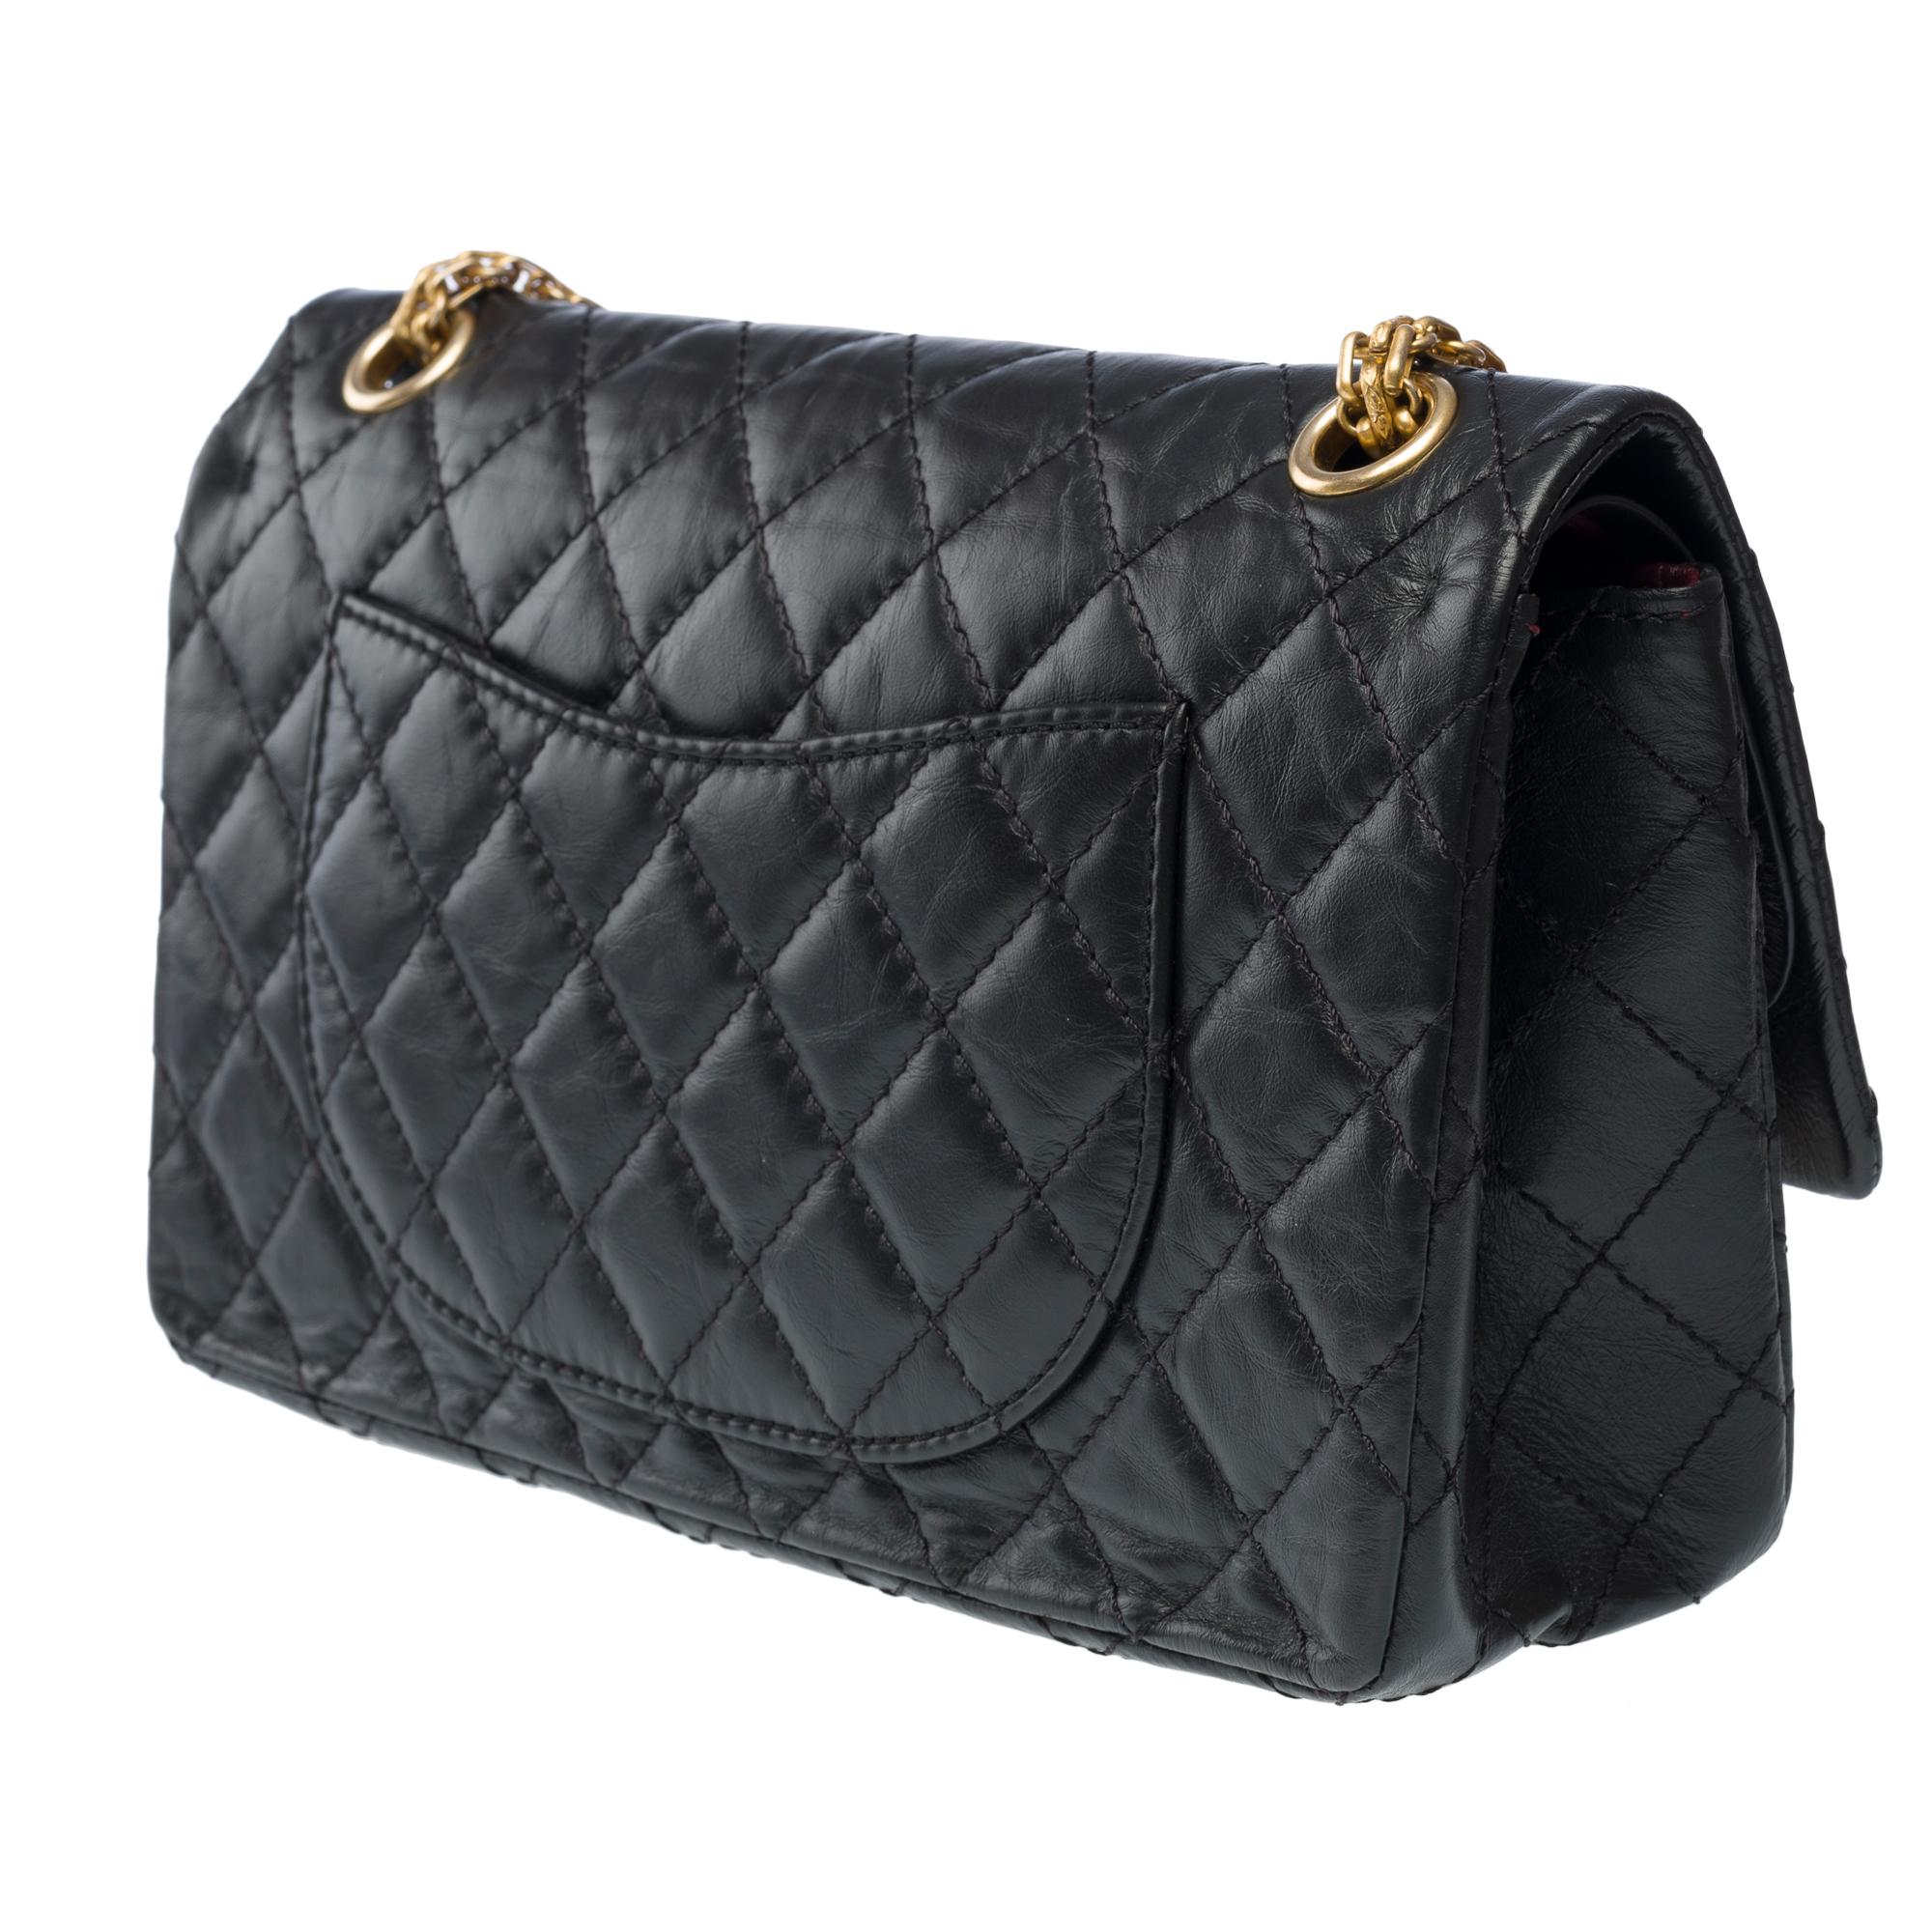 Lucky Charms 2.55 Chanel double flap shoulder bag in black quilted leather, AGHW For Sale 2